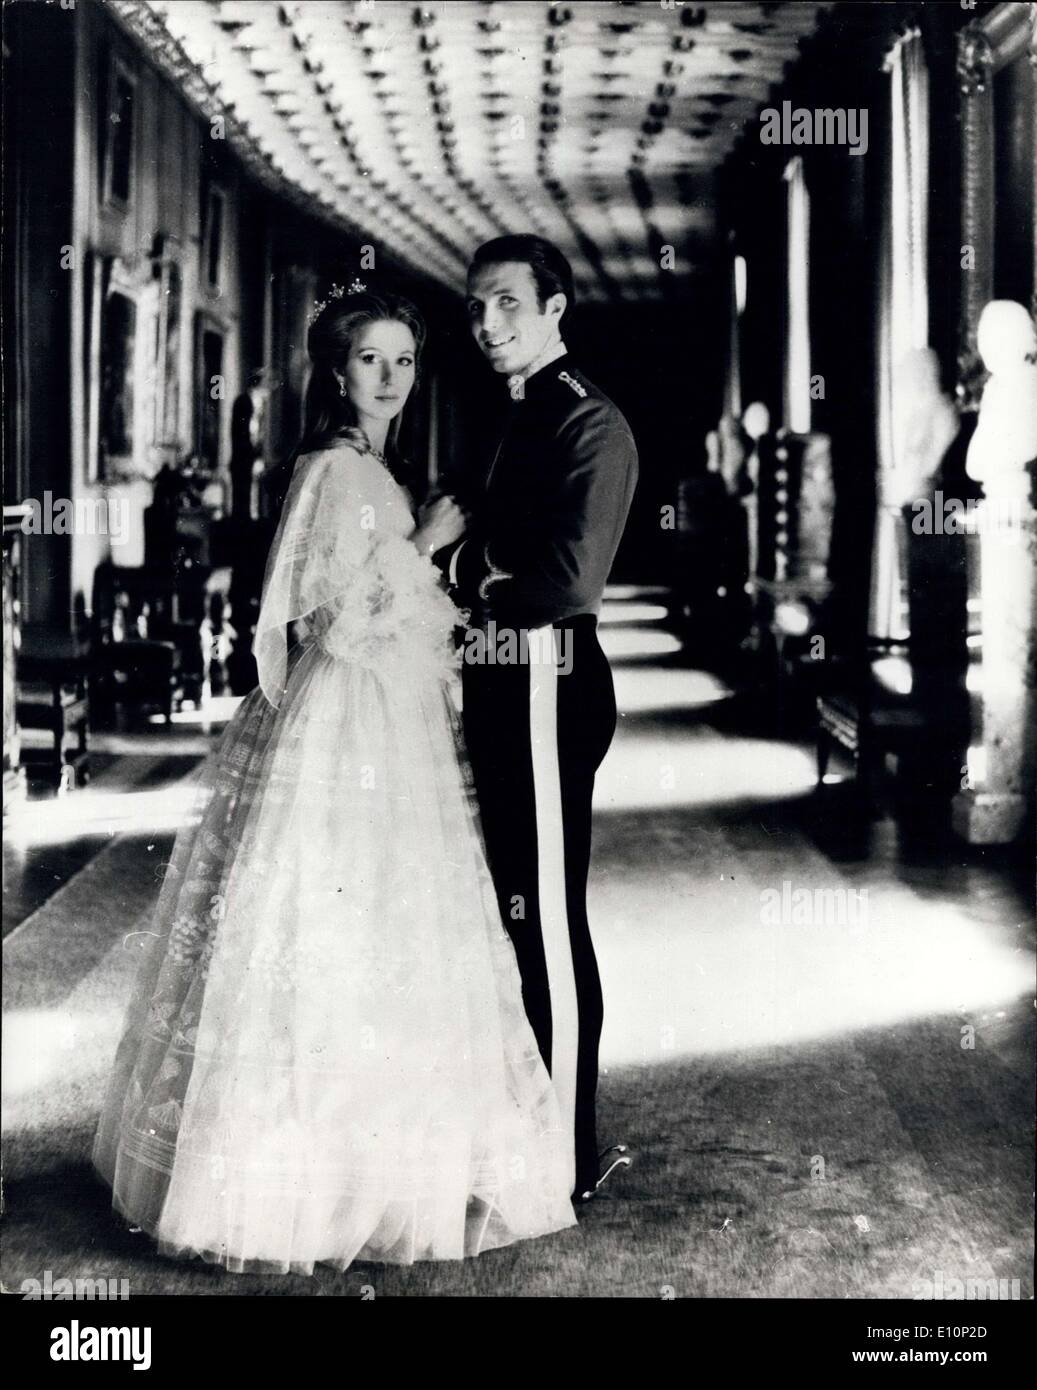 Nov. 06, 1973 - H.R.H. Princess Anne And Captain Mark Phillips: The ...